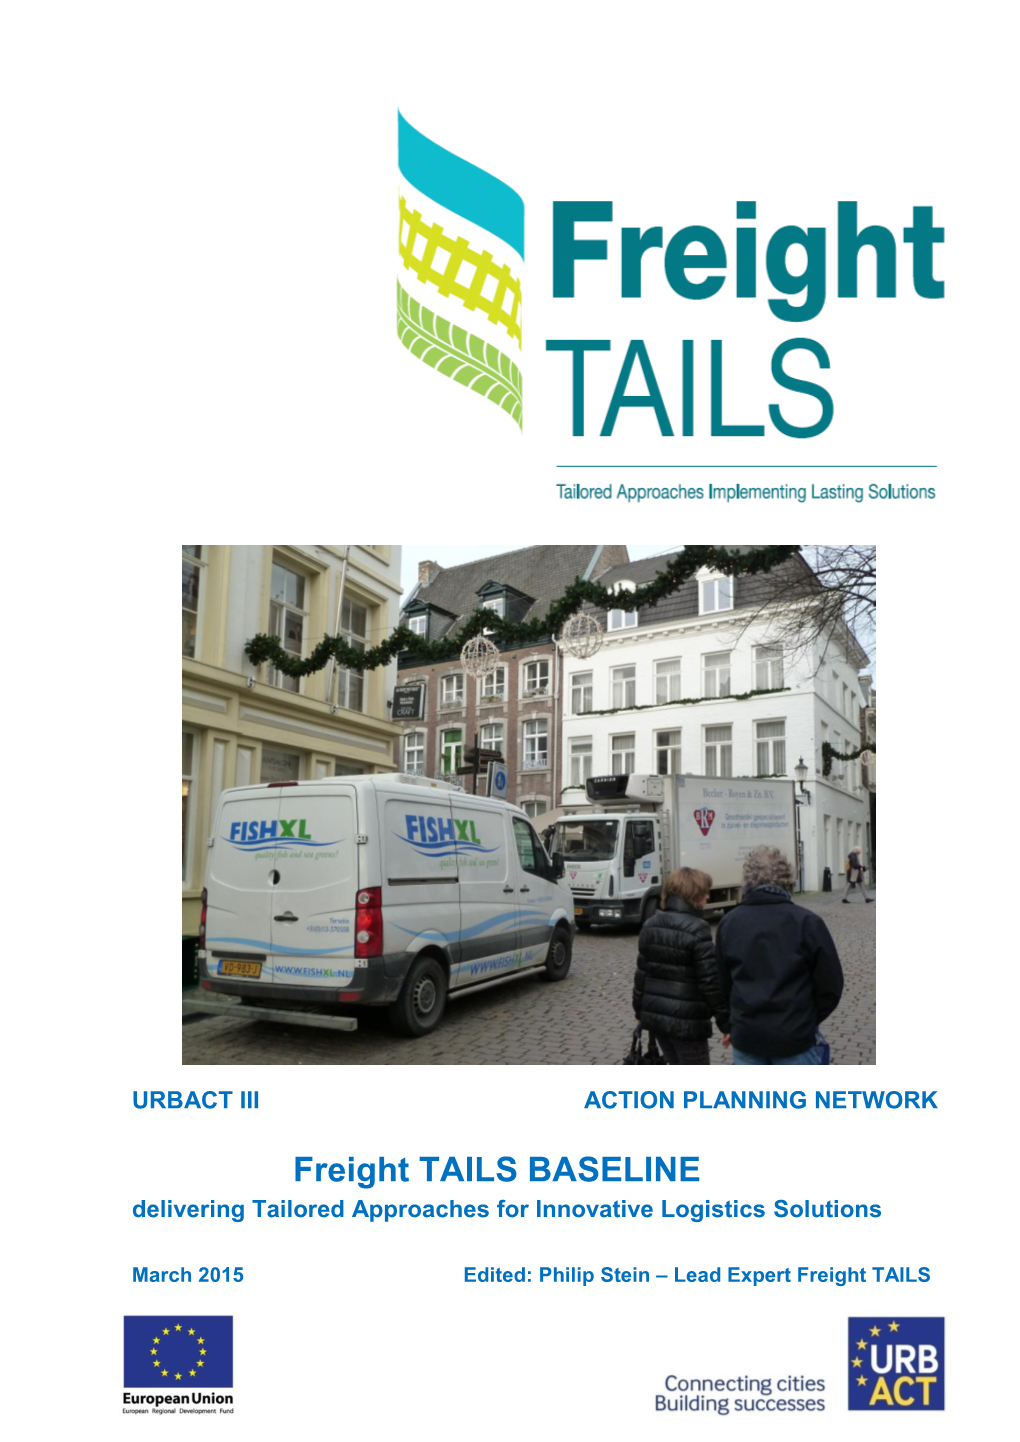 Freight TAILS BASELINE Delivering Tailored Approaches for Innovative Logistics Solutions